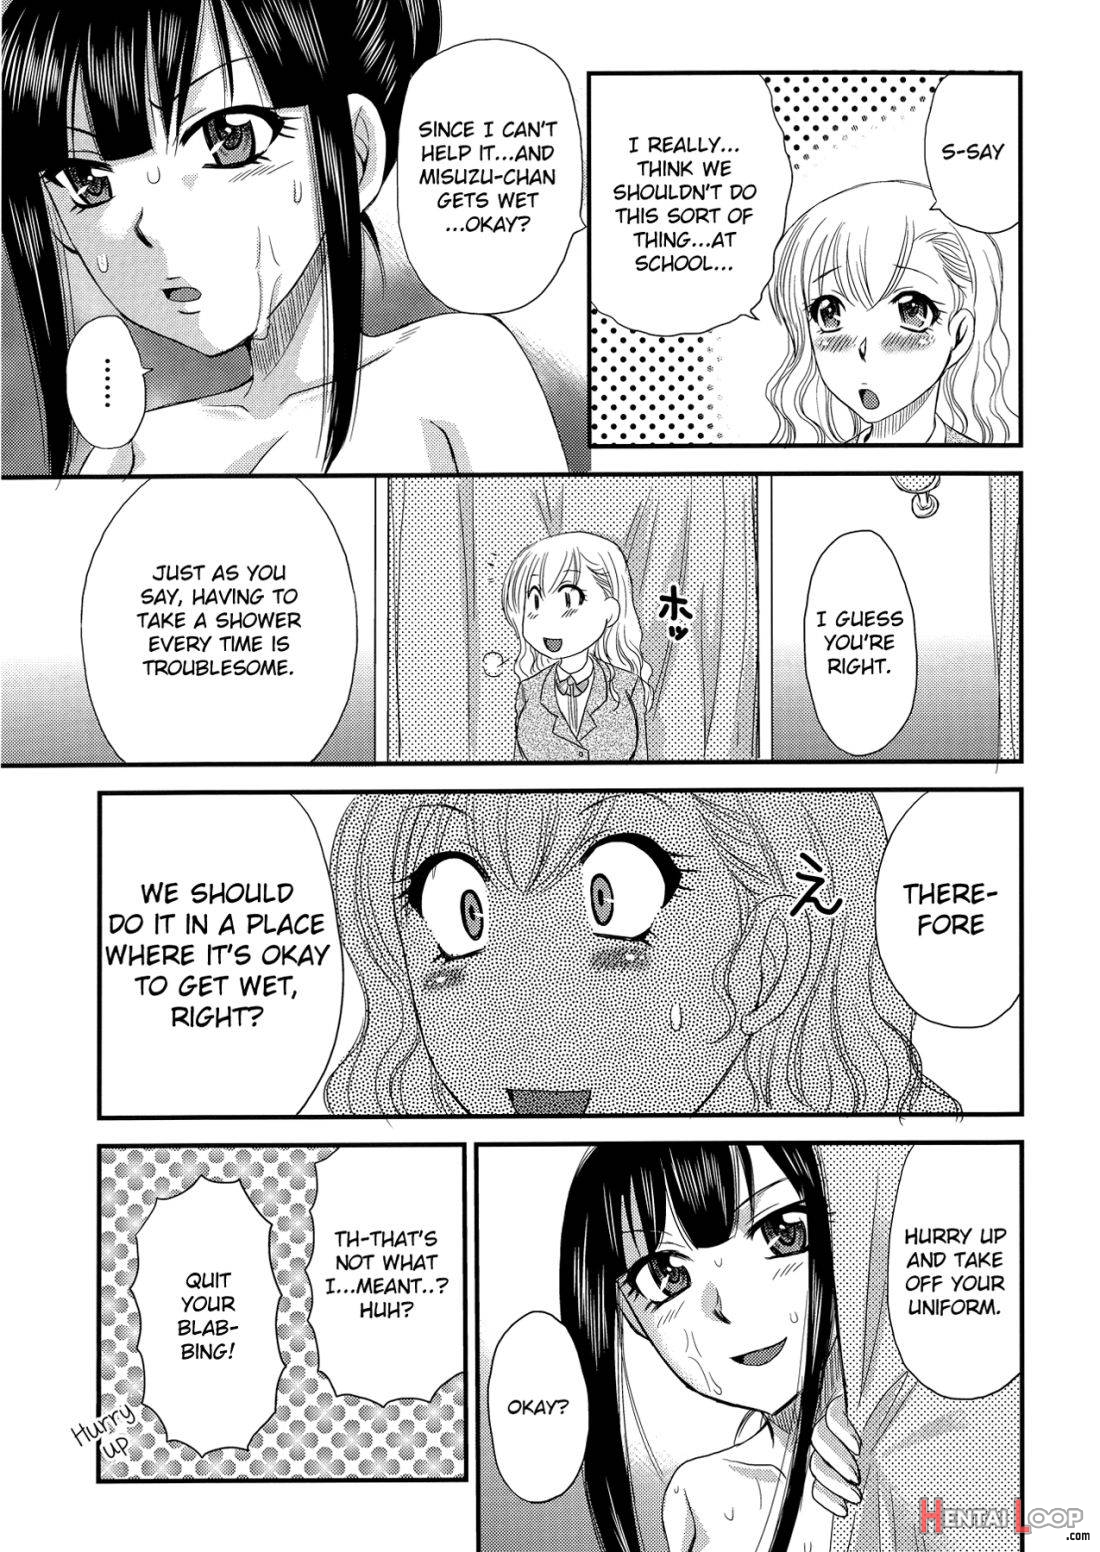 Selfish Top And Airheaded Bottom’s Yuri Smut 2 page 4